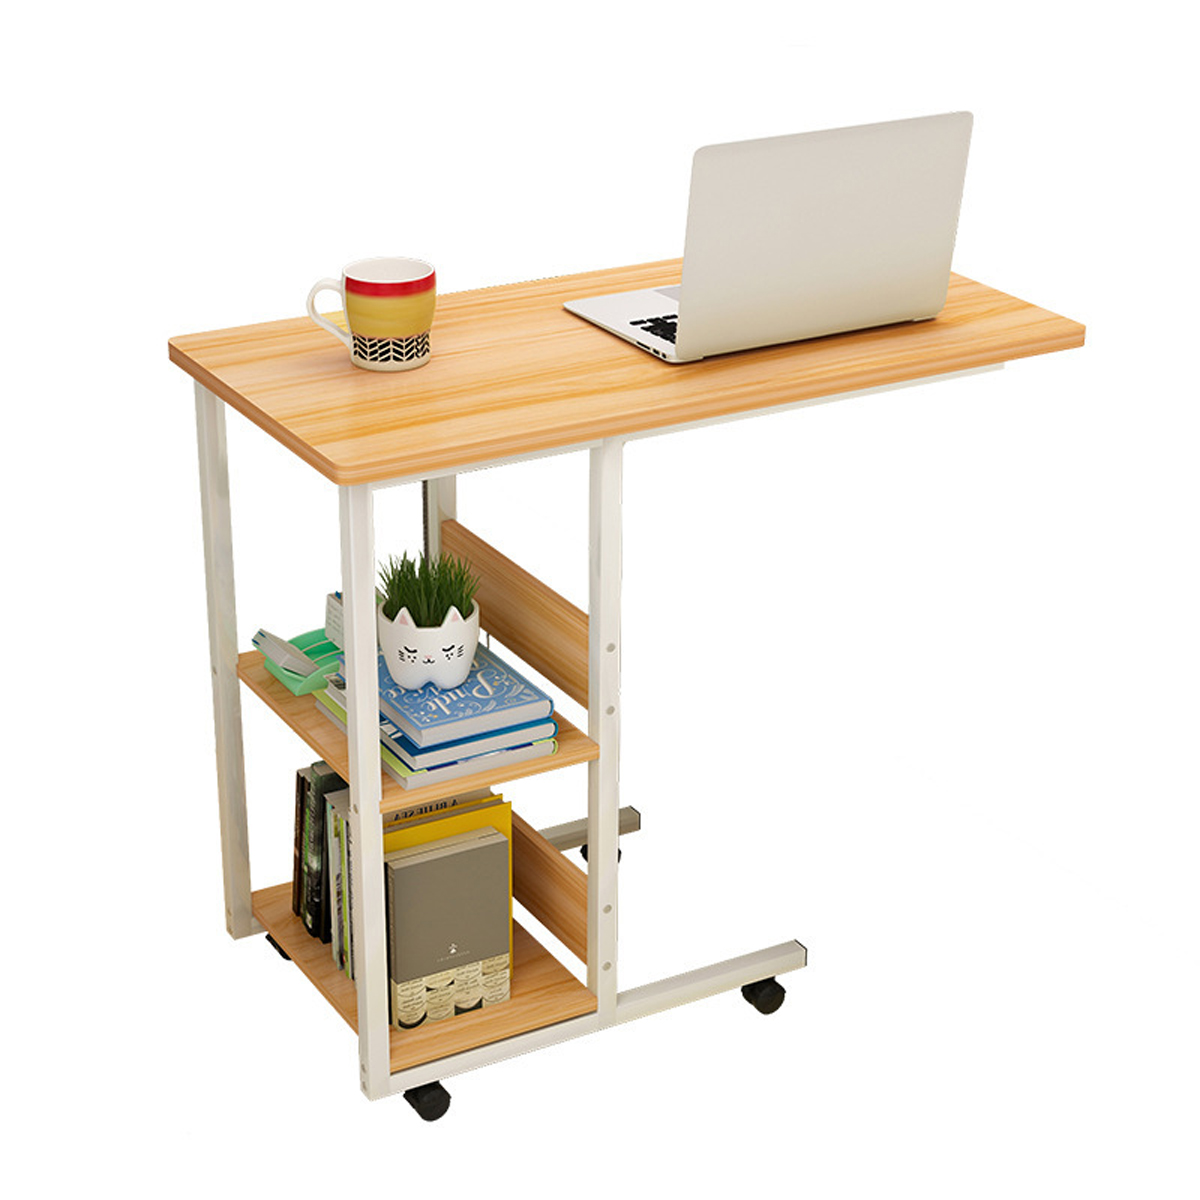 

Multifunctional Movable Bedside Laptop Desk Computer Table Study Table Computer Stand with 2 Tiers Storage Shelves Bookshelf